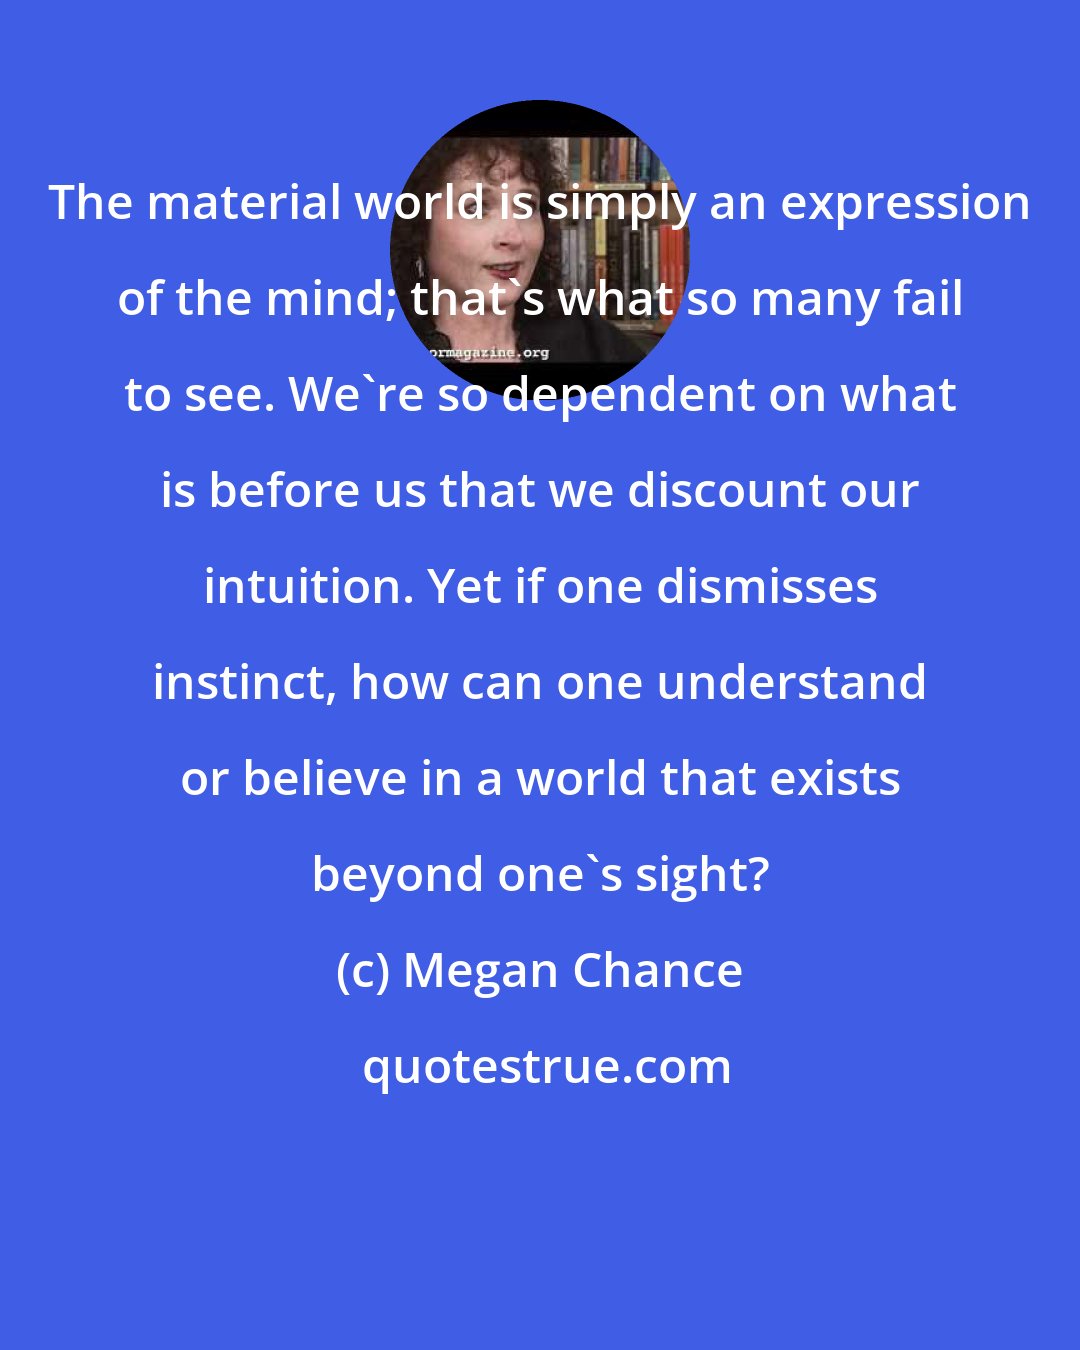 Megan Chance: The material world is simply an expression of the mind; that's what so many fail to see. We're so dependent on what is before us that we discount our intuition. Yet if one dismisses instinct, how can one understand or believe in a world that exists beyond one's sight?